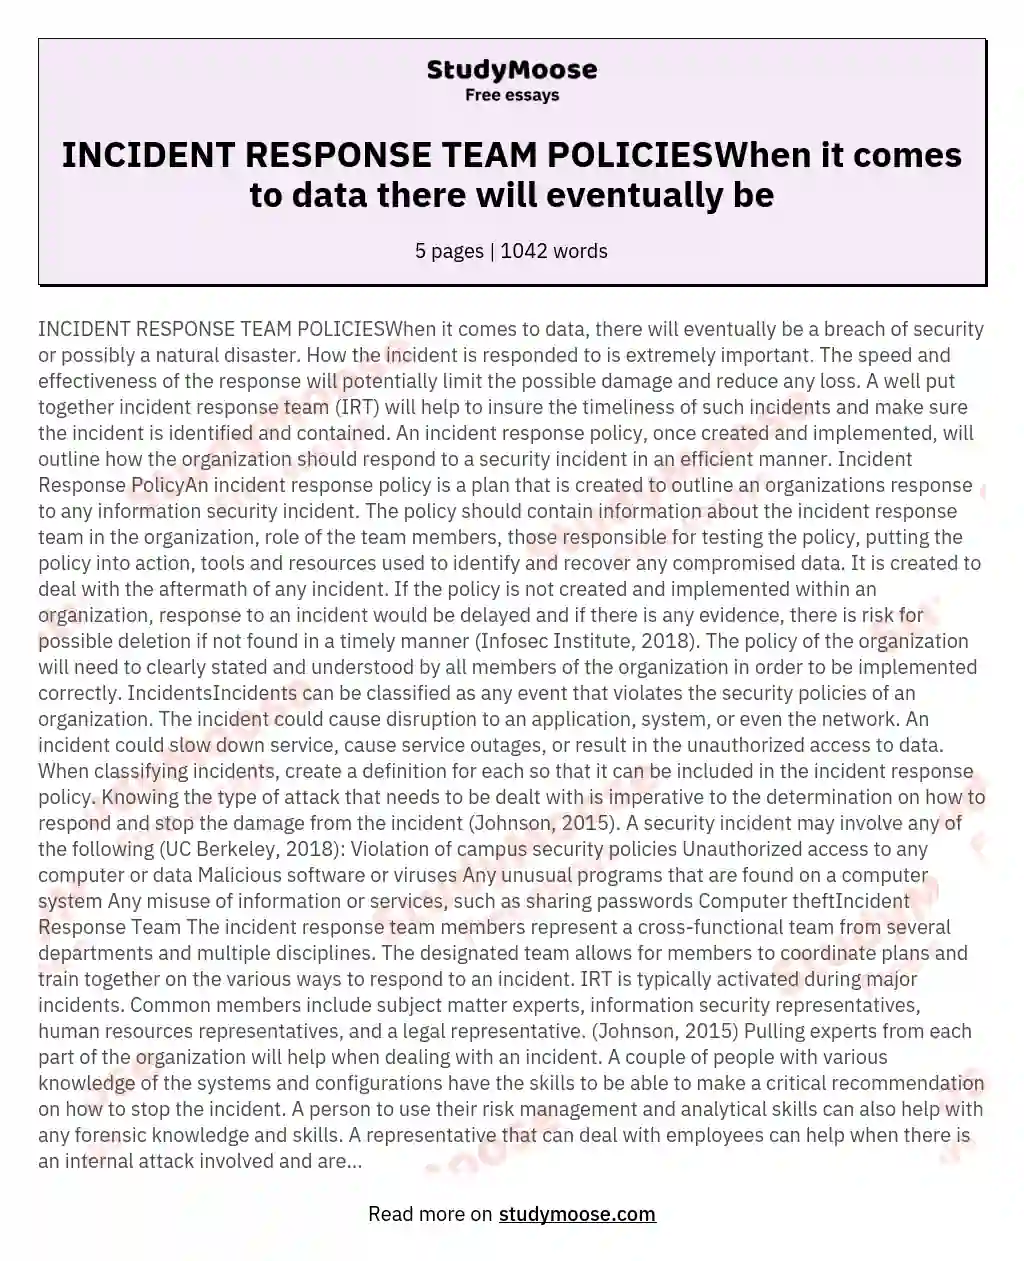 INCIDENT RESPONSE TEAM POLICIESWhen it comes to data there will eventually be essay